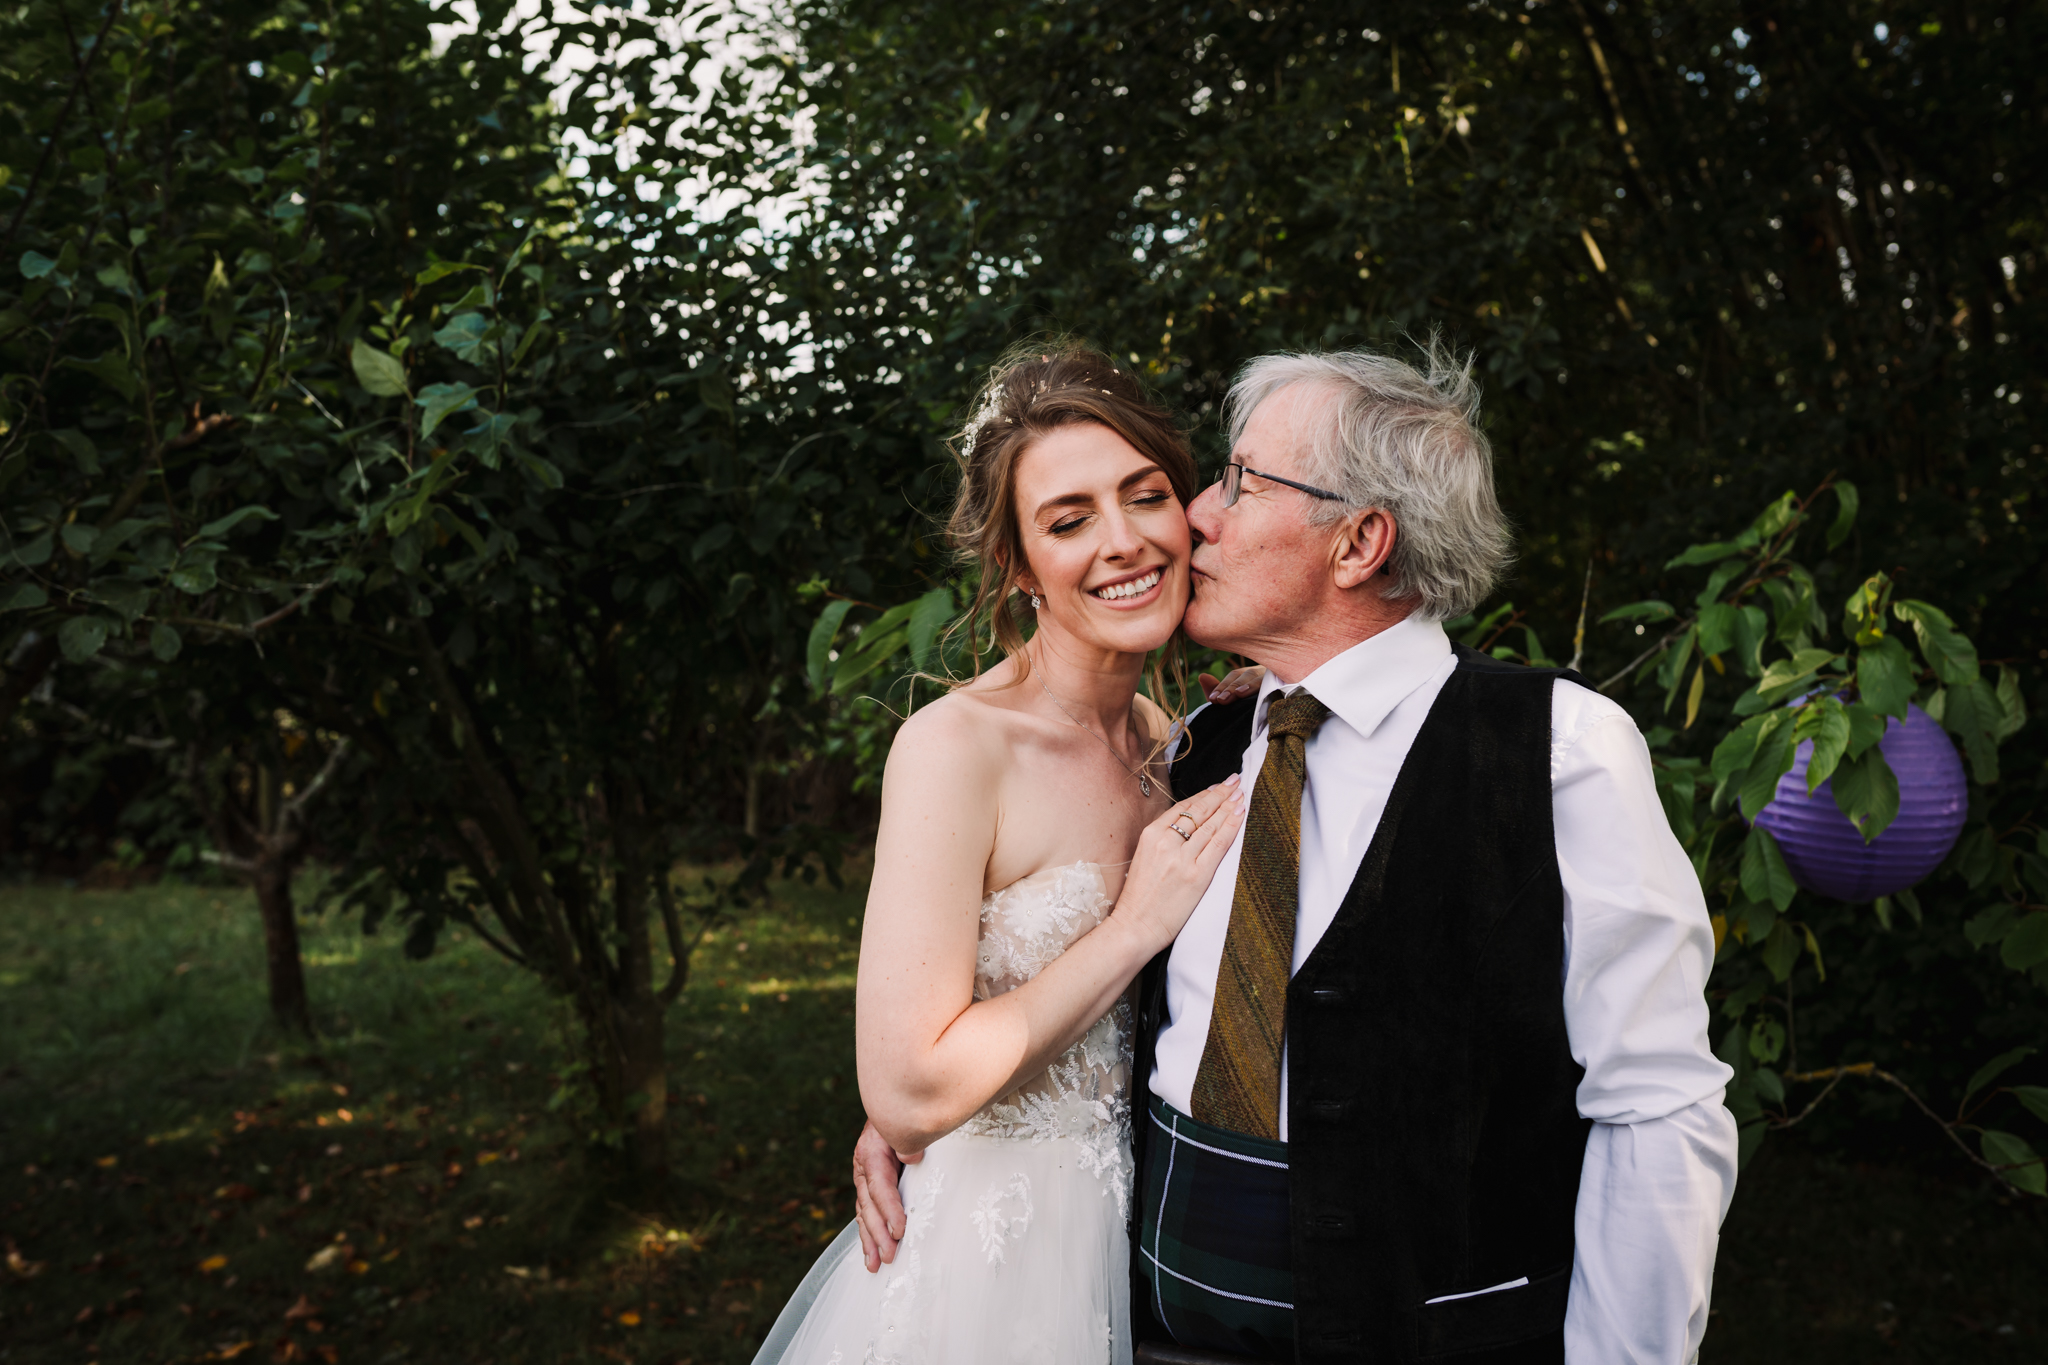 father of the bride kisses her during garden party reception